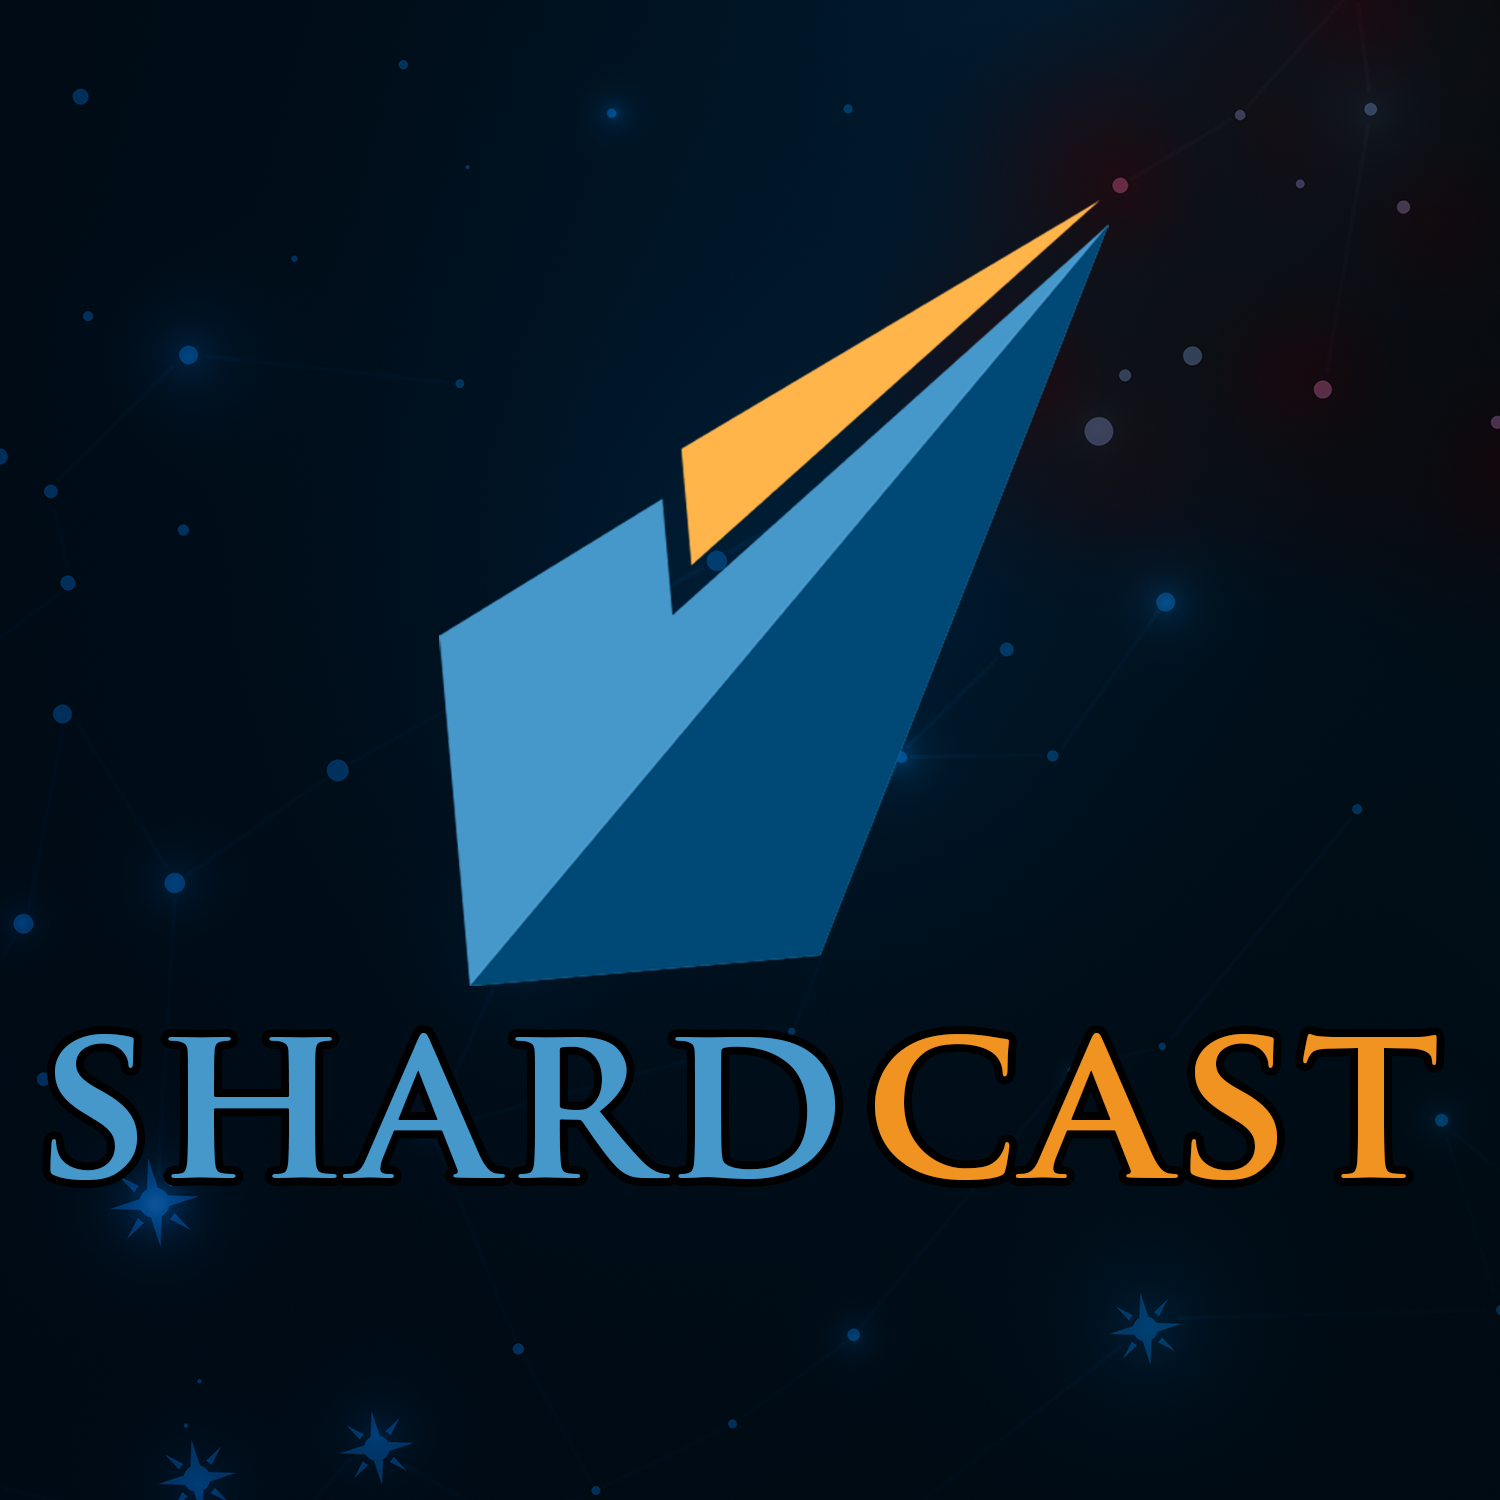 More information about "Shardcast: Harmony"